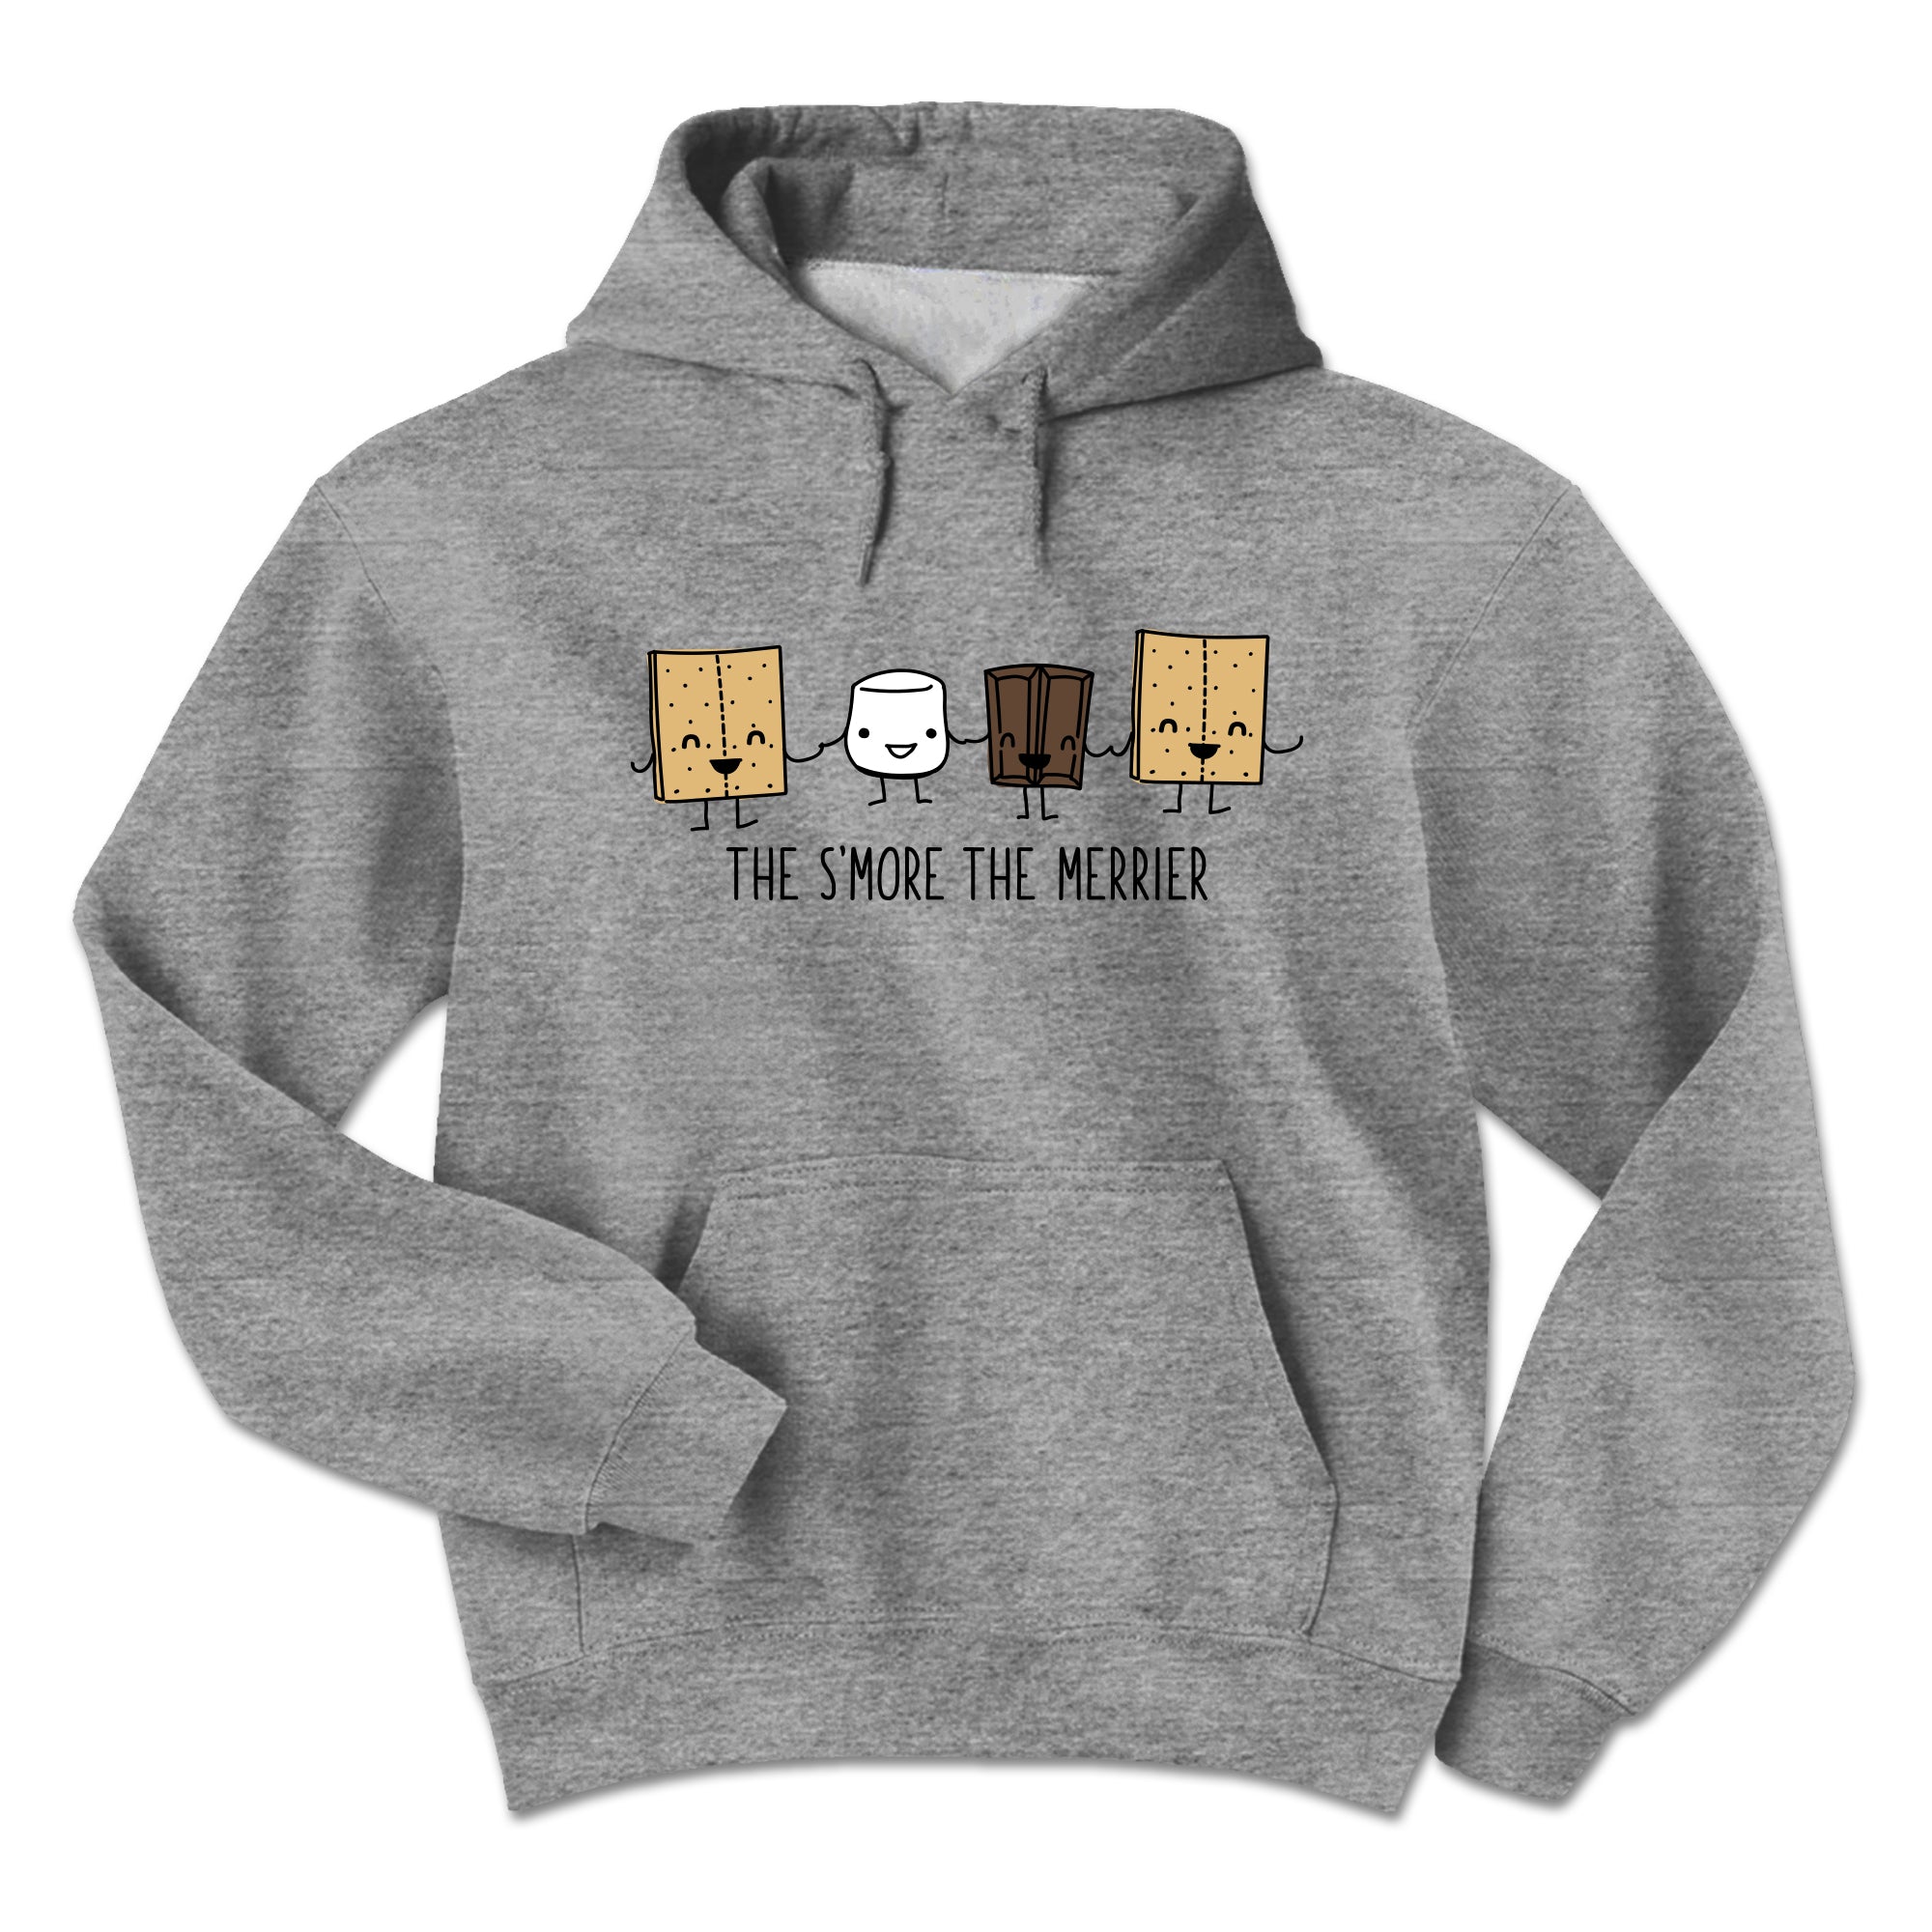 Earth Sun Moon The S'more The Merrier Hooded Sweatshirt - Graphite Heather - Small